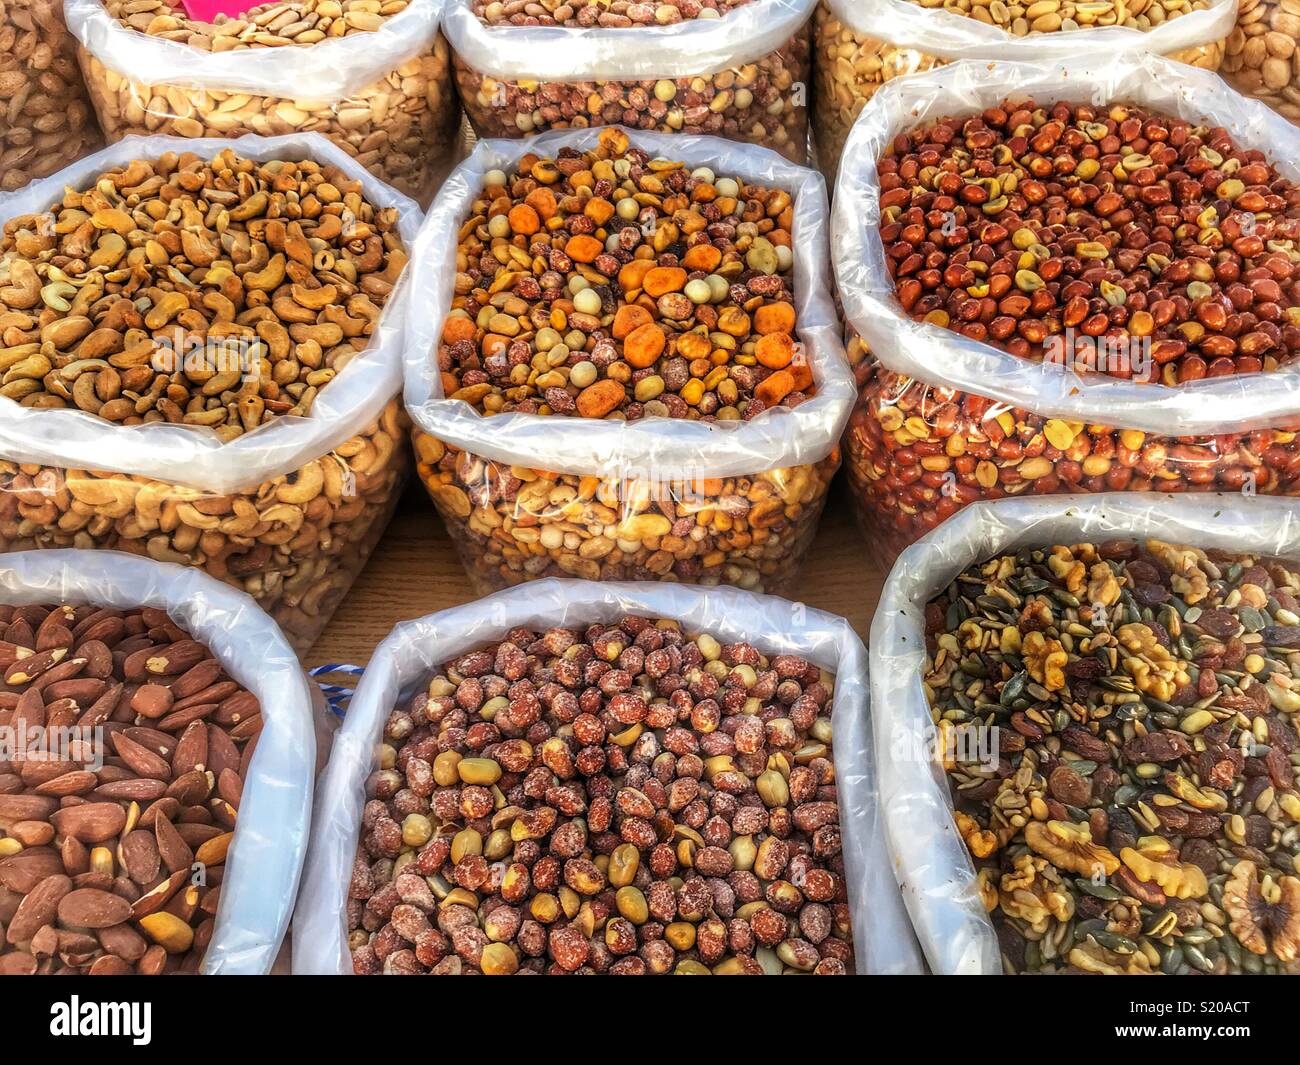 Variety of nuts including peanuts, almonds, Walnuts and raisins, cashew nuts, mixed nuts, for sale on a market stall in Javea, Spain Stock Photo